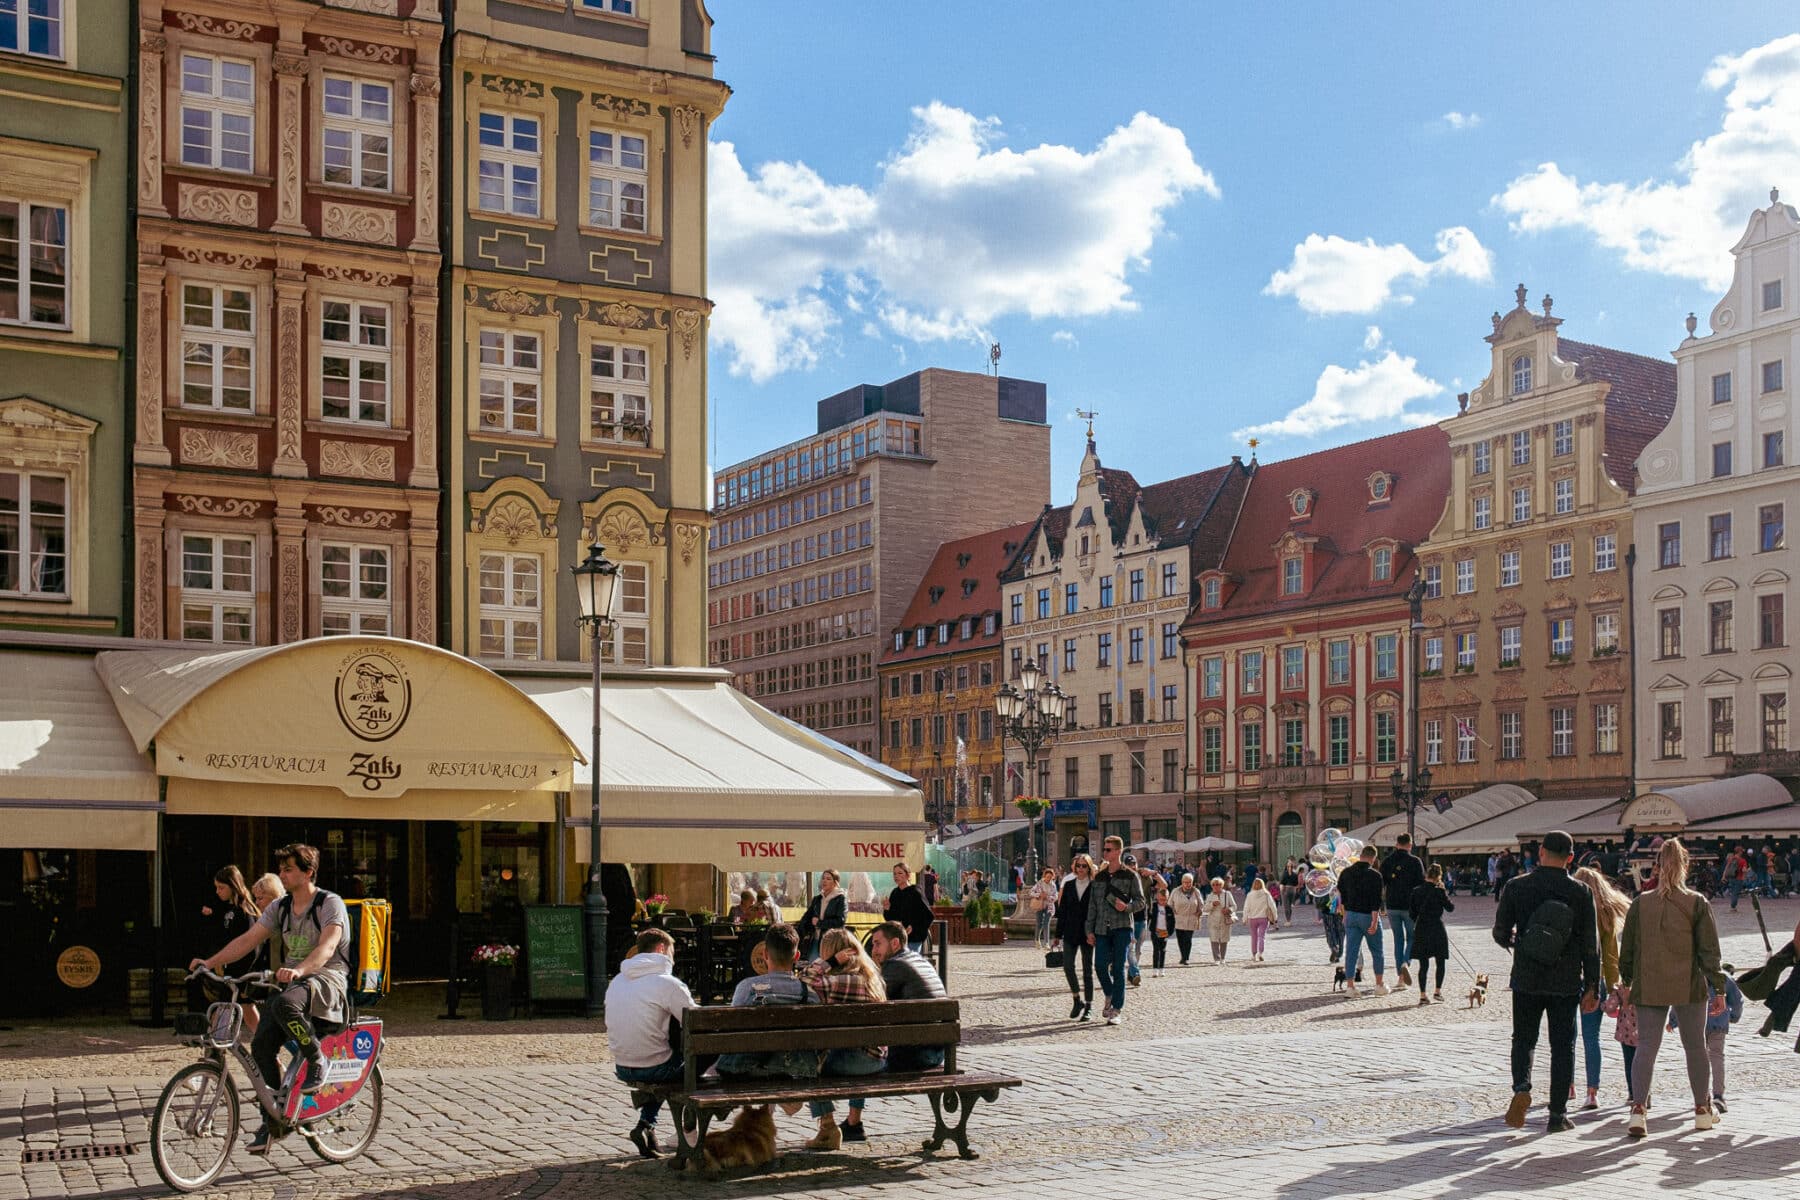 Northwest corner of Wrocław’s Market Square, facing Plac Solny. Photo by Frankee Lyons.